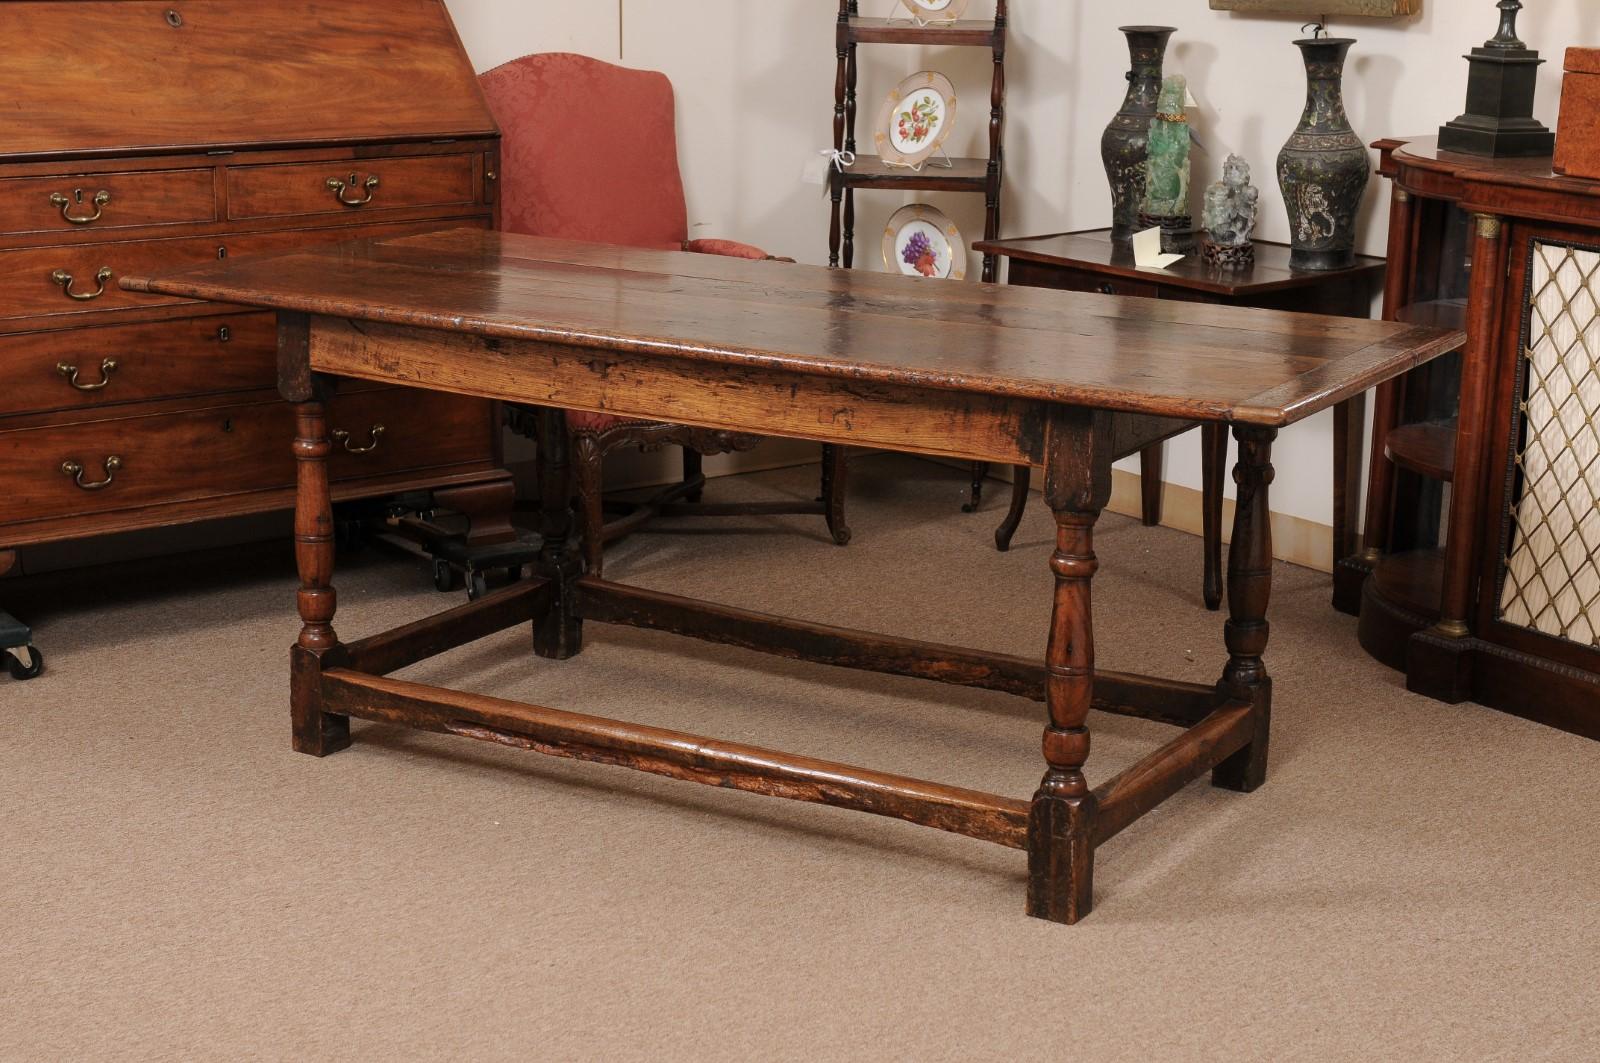  Early 18th Century English Long Oak Hall Table with Carved Frieze, Turned Legs  For Sale 10